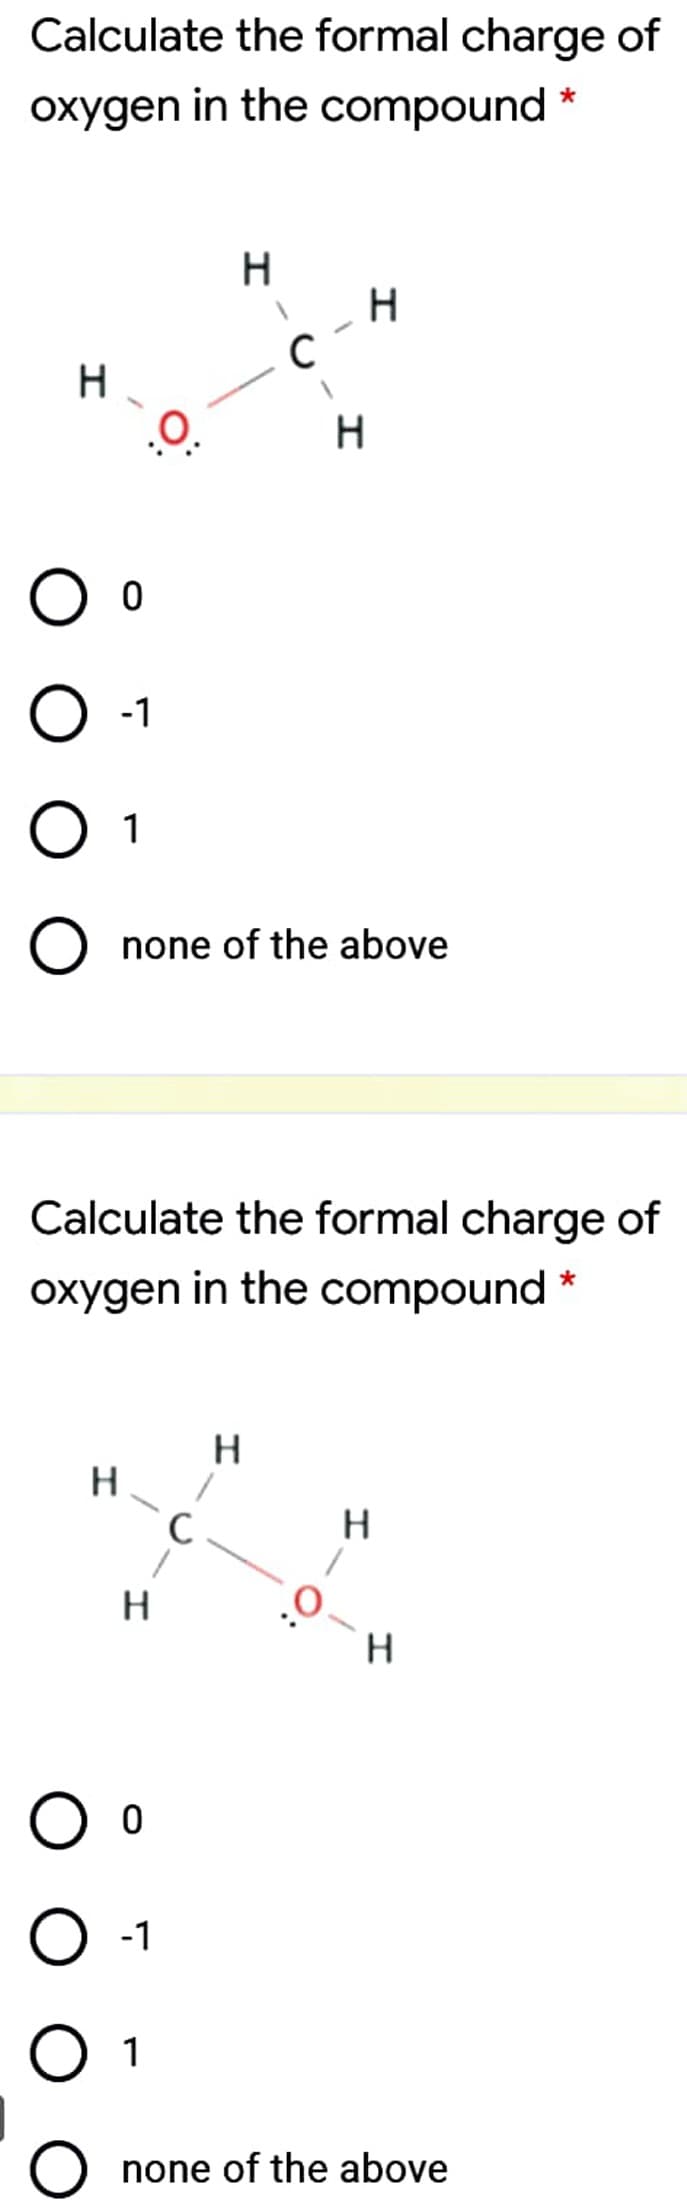 Calculate the formal charge of
oxygen in the compound *
.O.
-1
O 1
none of the above
Calculate the formal charge of
oxygen in the compound
H
-1
O 1
none of the above
